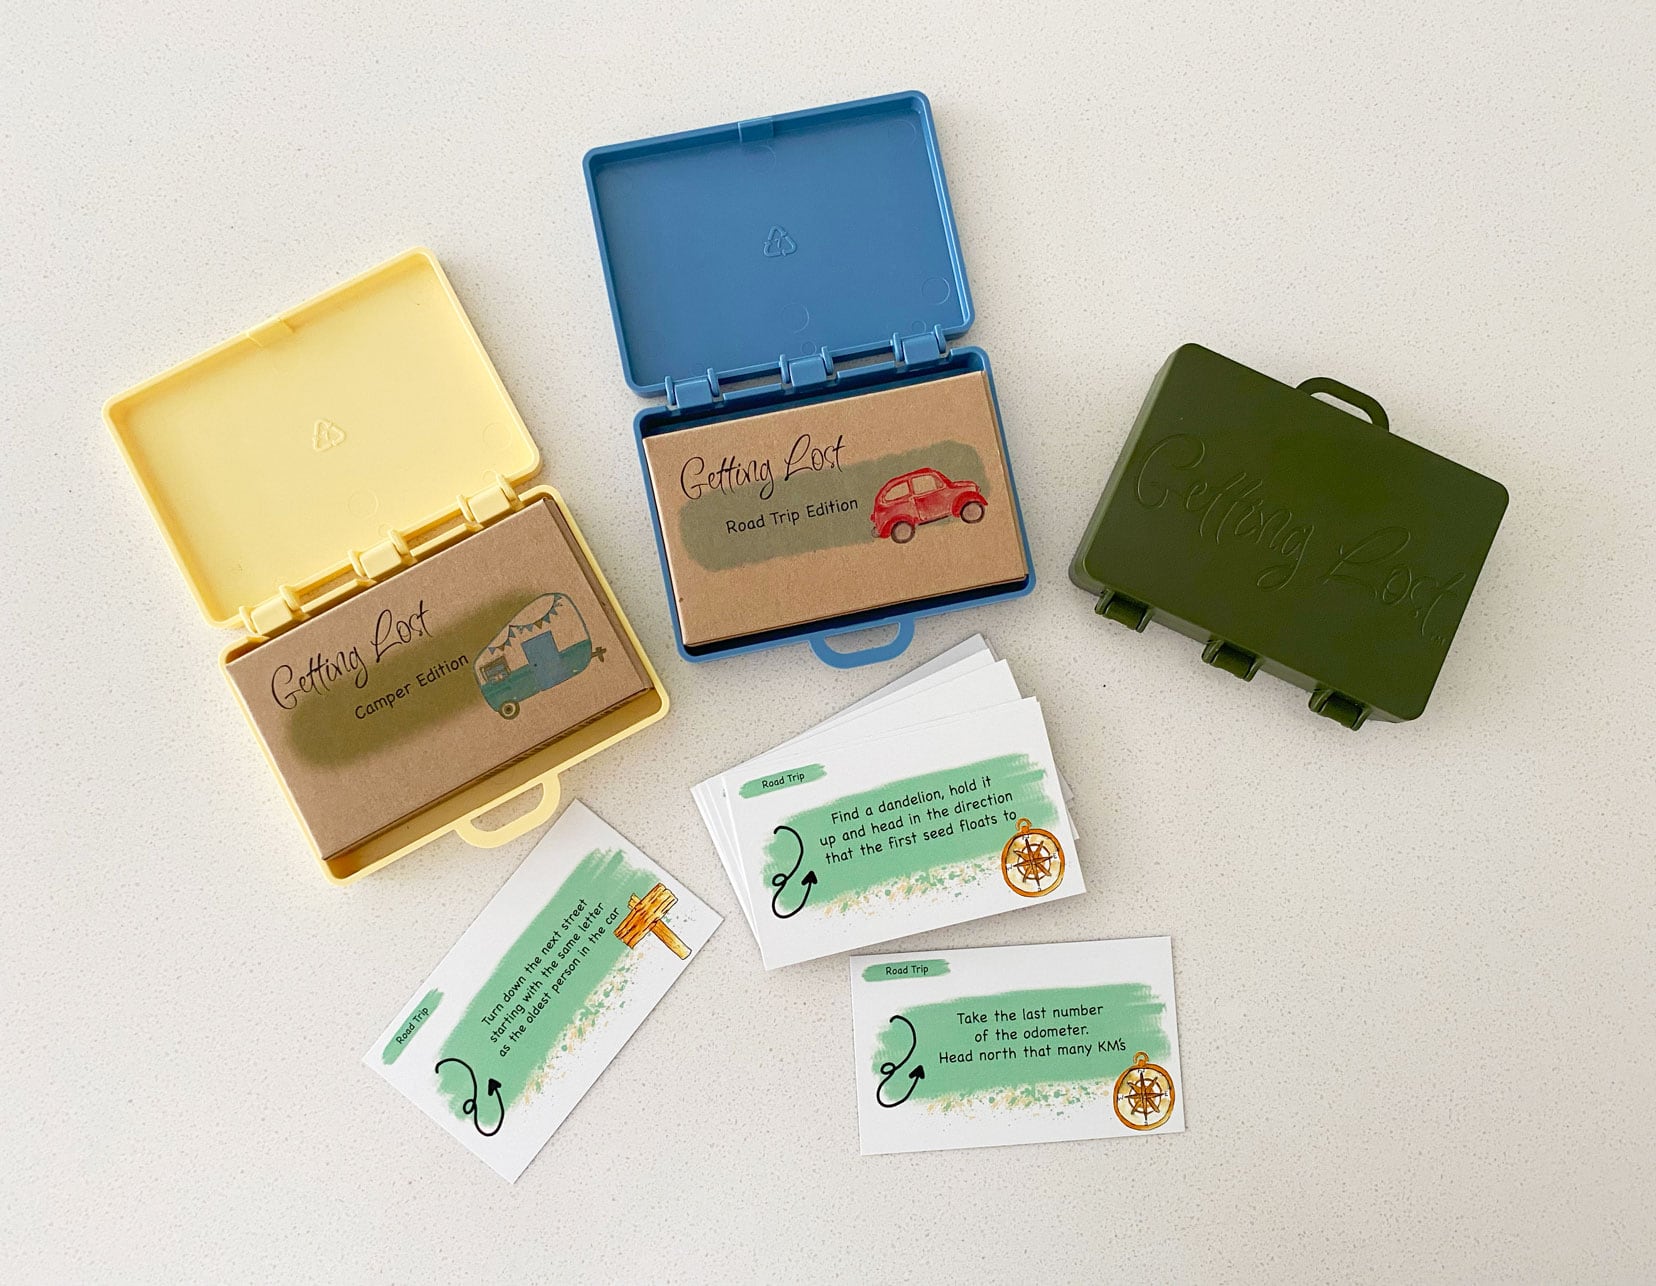 Three different versions of the game Getting Lost - road trip version, camper version and Australia version showing the cards and the little suitcase holders